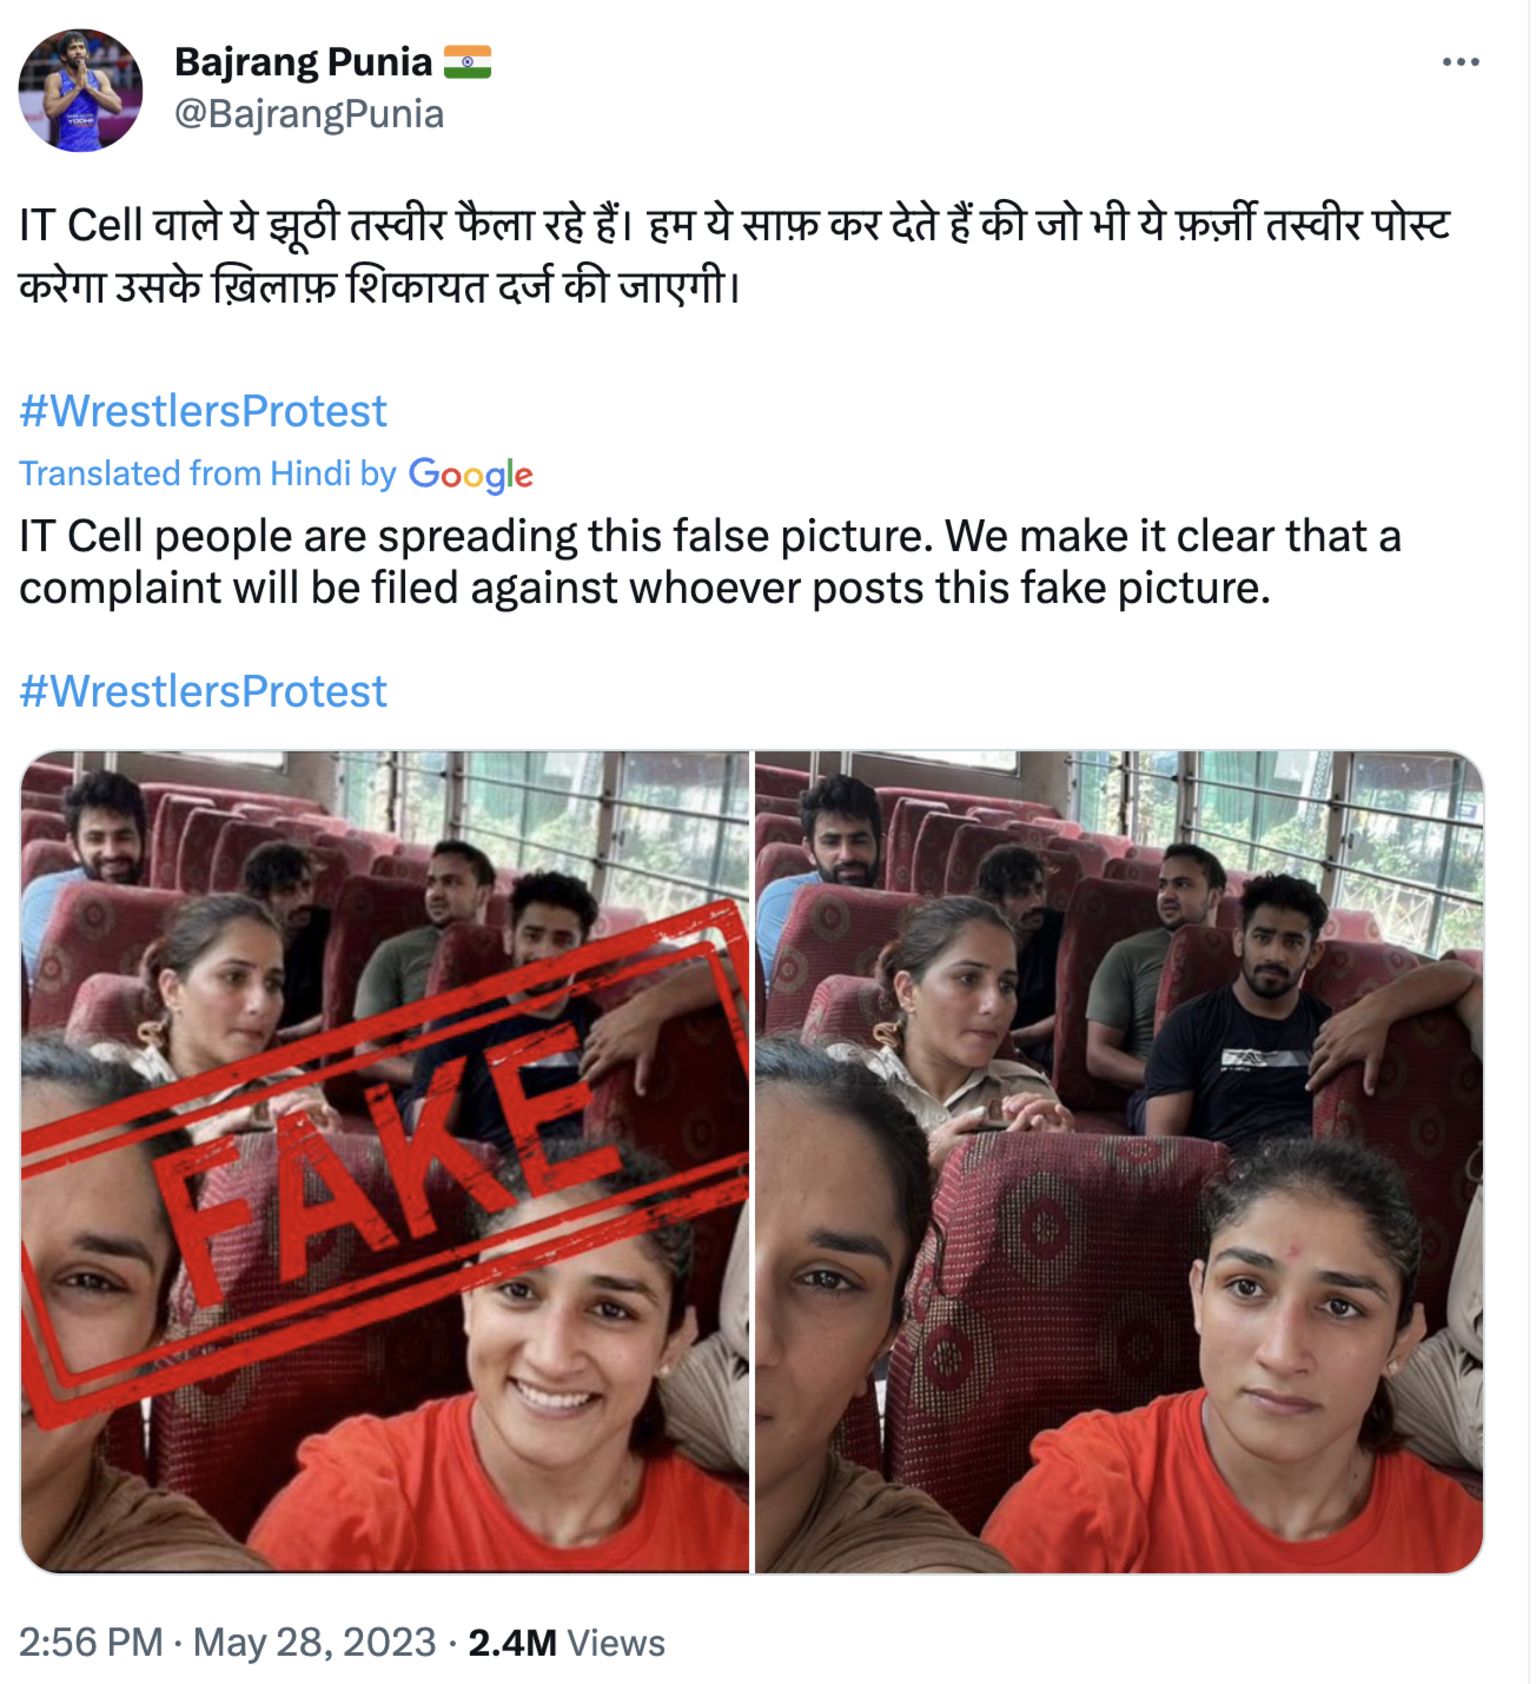 Tweet of fake/manipulated image of wrestlers on police bus with caption; "IT Cell people are spreading this false picture. We make it clear that a complaint will be filed against whoever posts this fake picture."